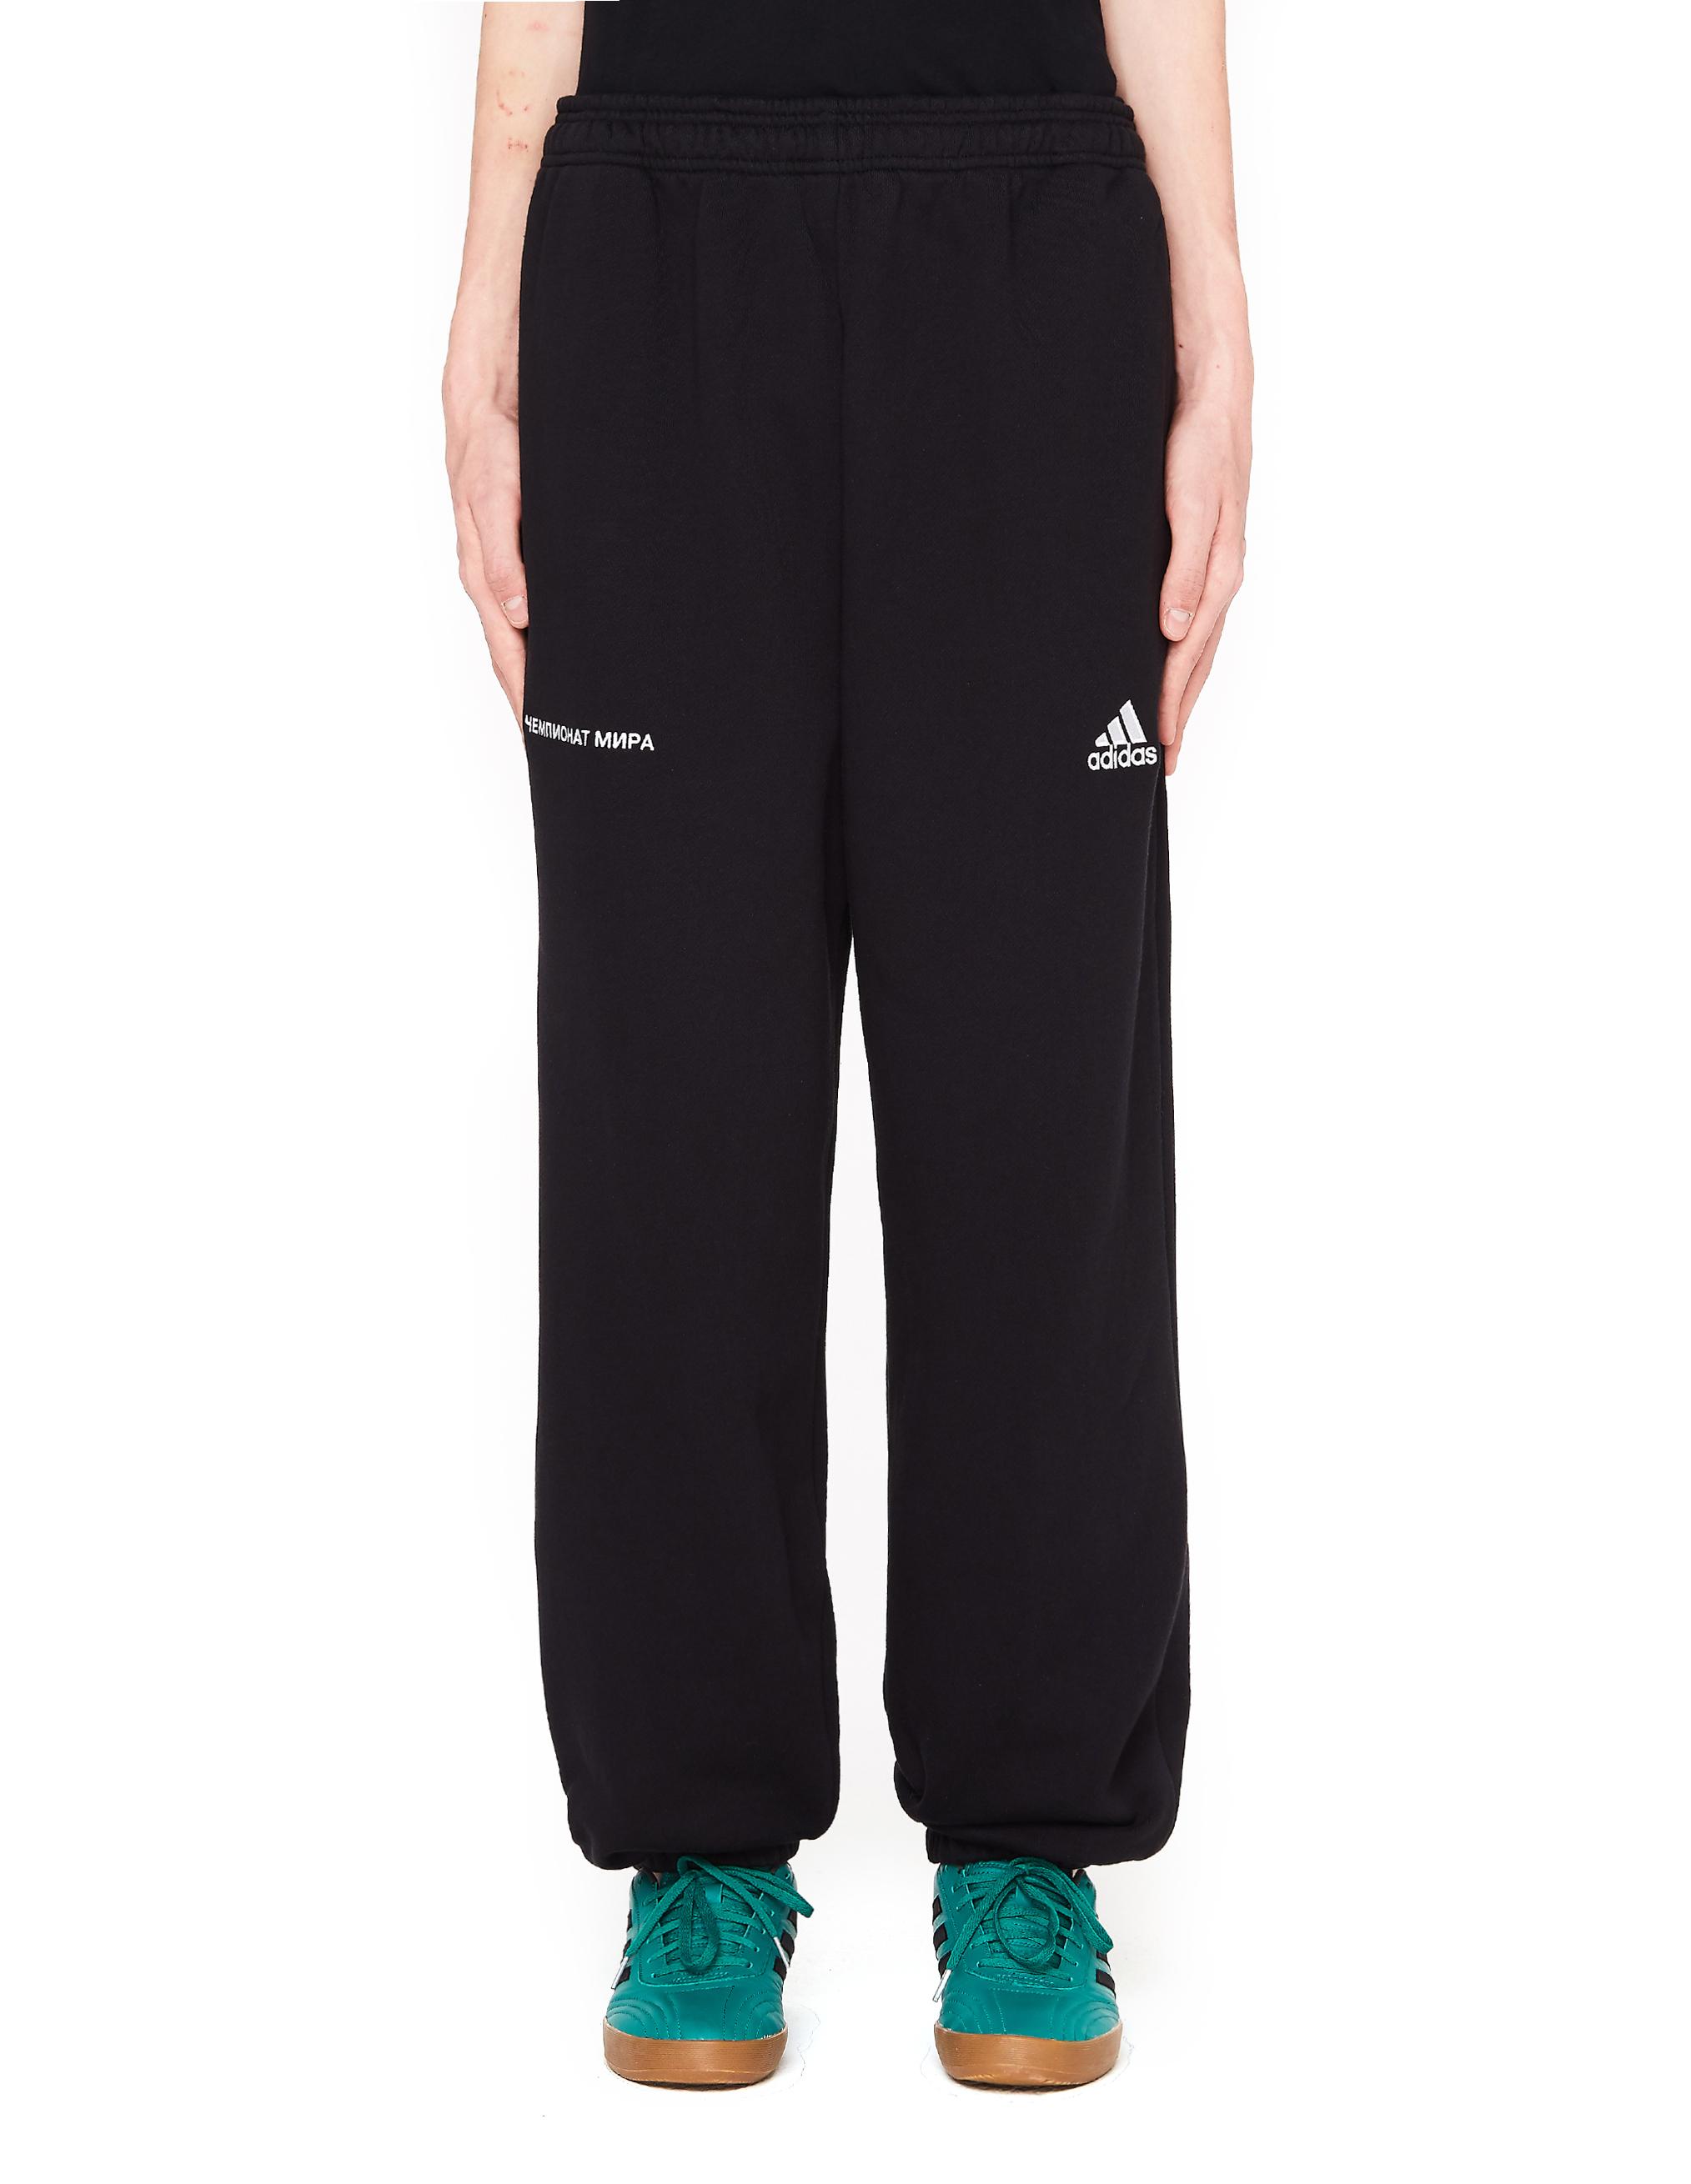 gosha rubchinskiy adidas joggers Today's Deals- OFF-53% >Free Delivery